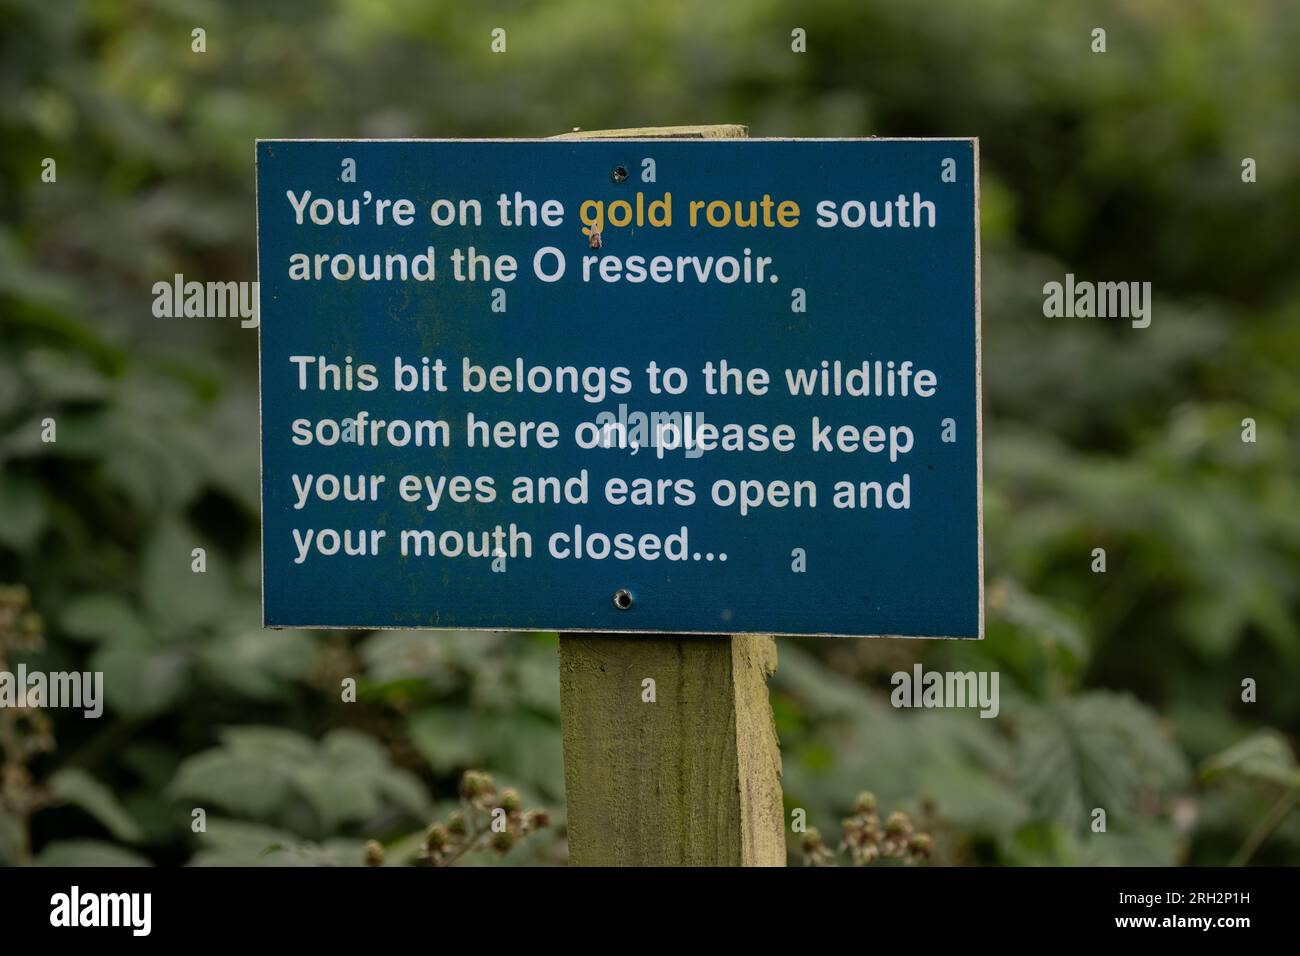 Warning notice to the public on a nature reserve to respect a wildlife area and remain silent at Tophill Low Reserve, East Yorkshire, U.K. Stock Photo